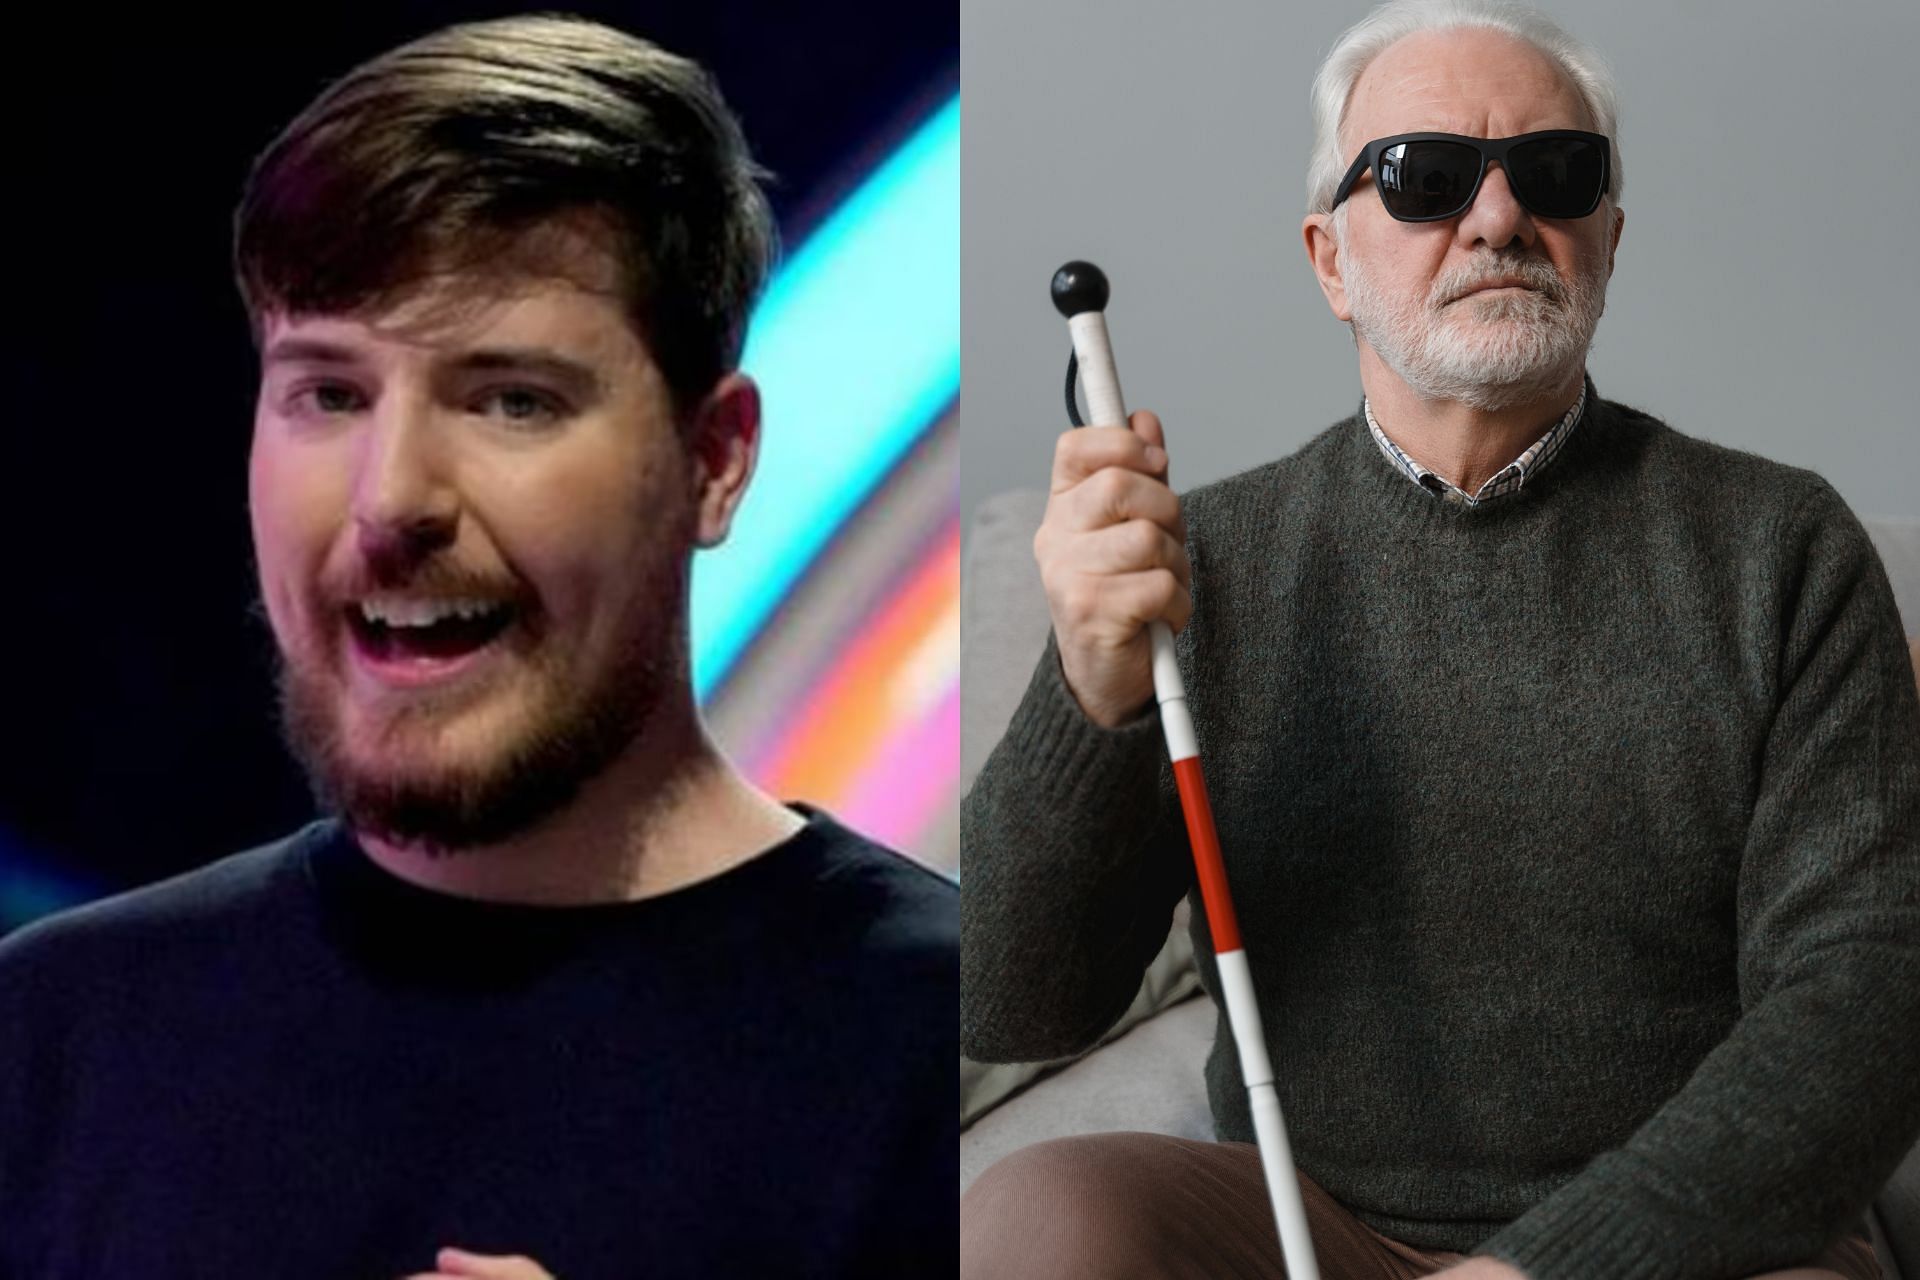 MrBeast helps 1,000 blind people see again, but some aren't happy, Fluid  Story